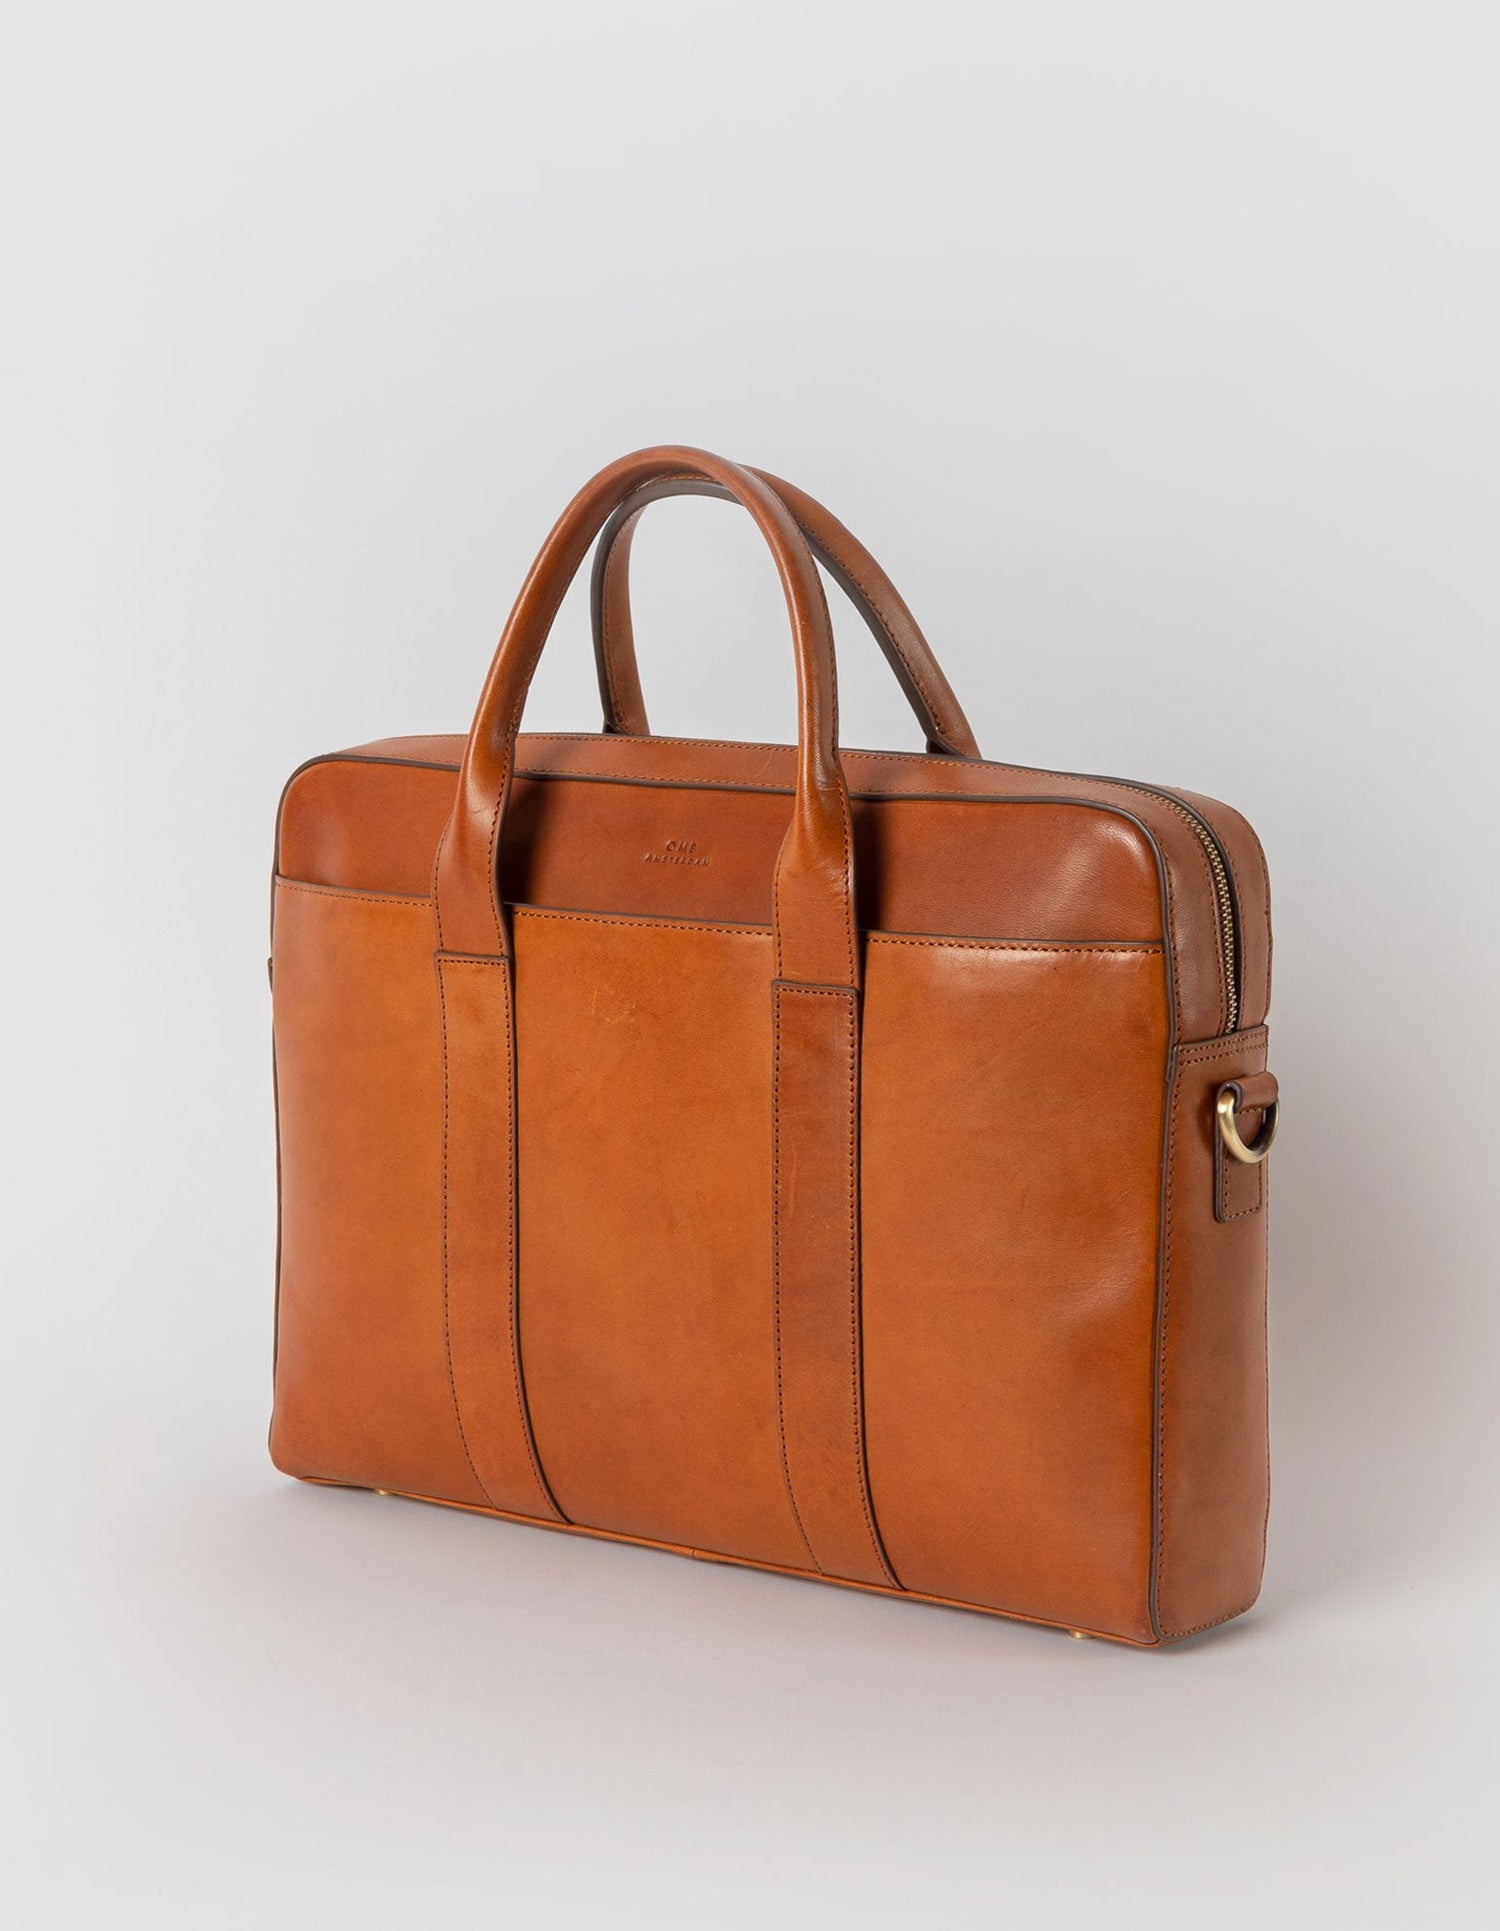 Harvey Bag Brown Classic Leather